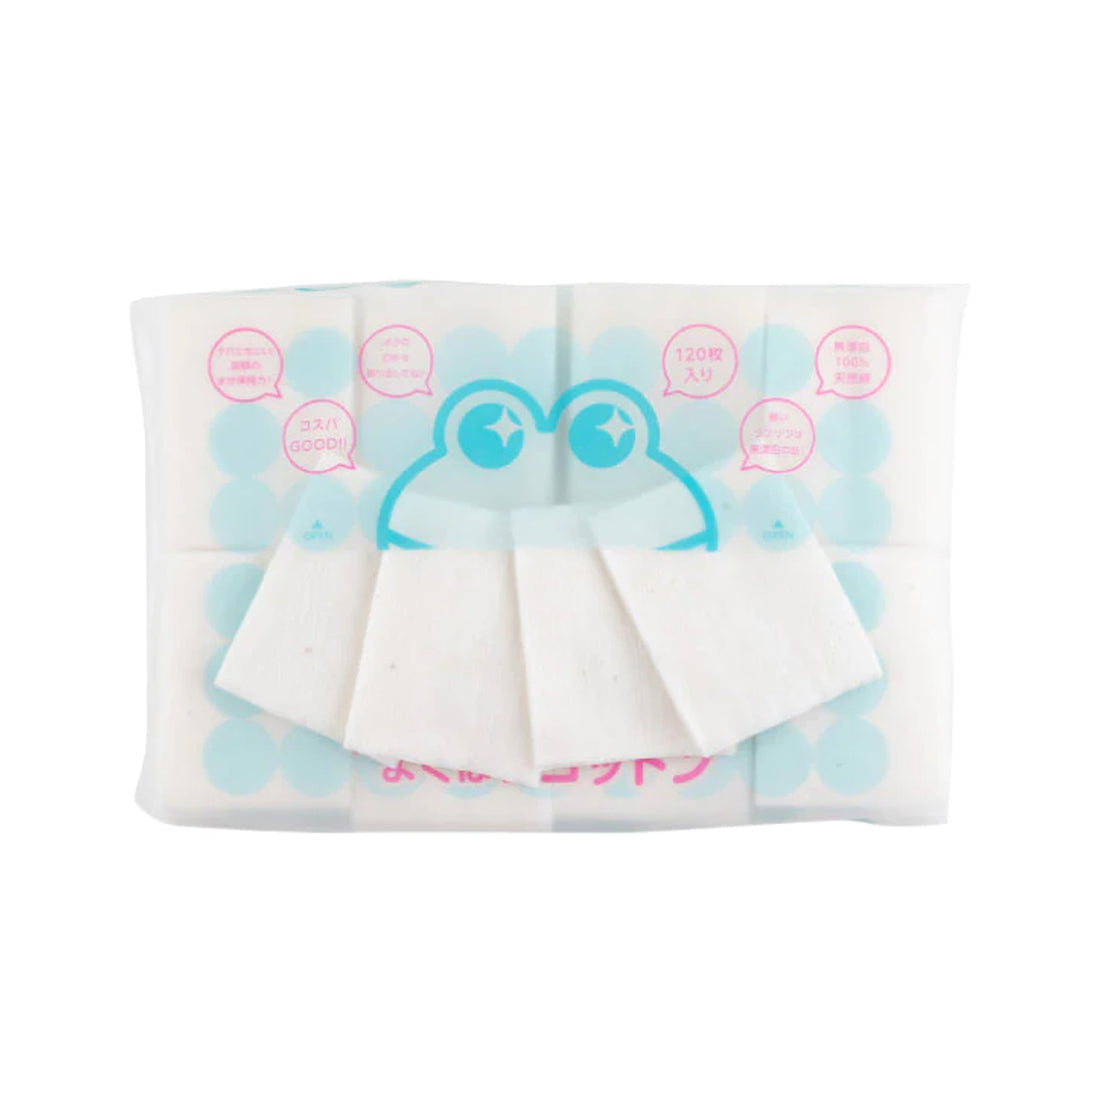 COSME STORE EXTRA SOFT NATURE COTTON PADS